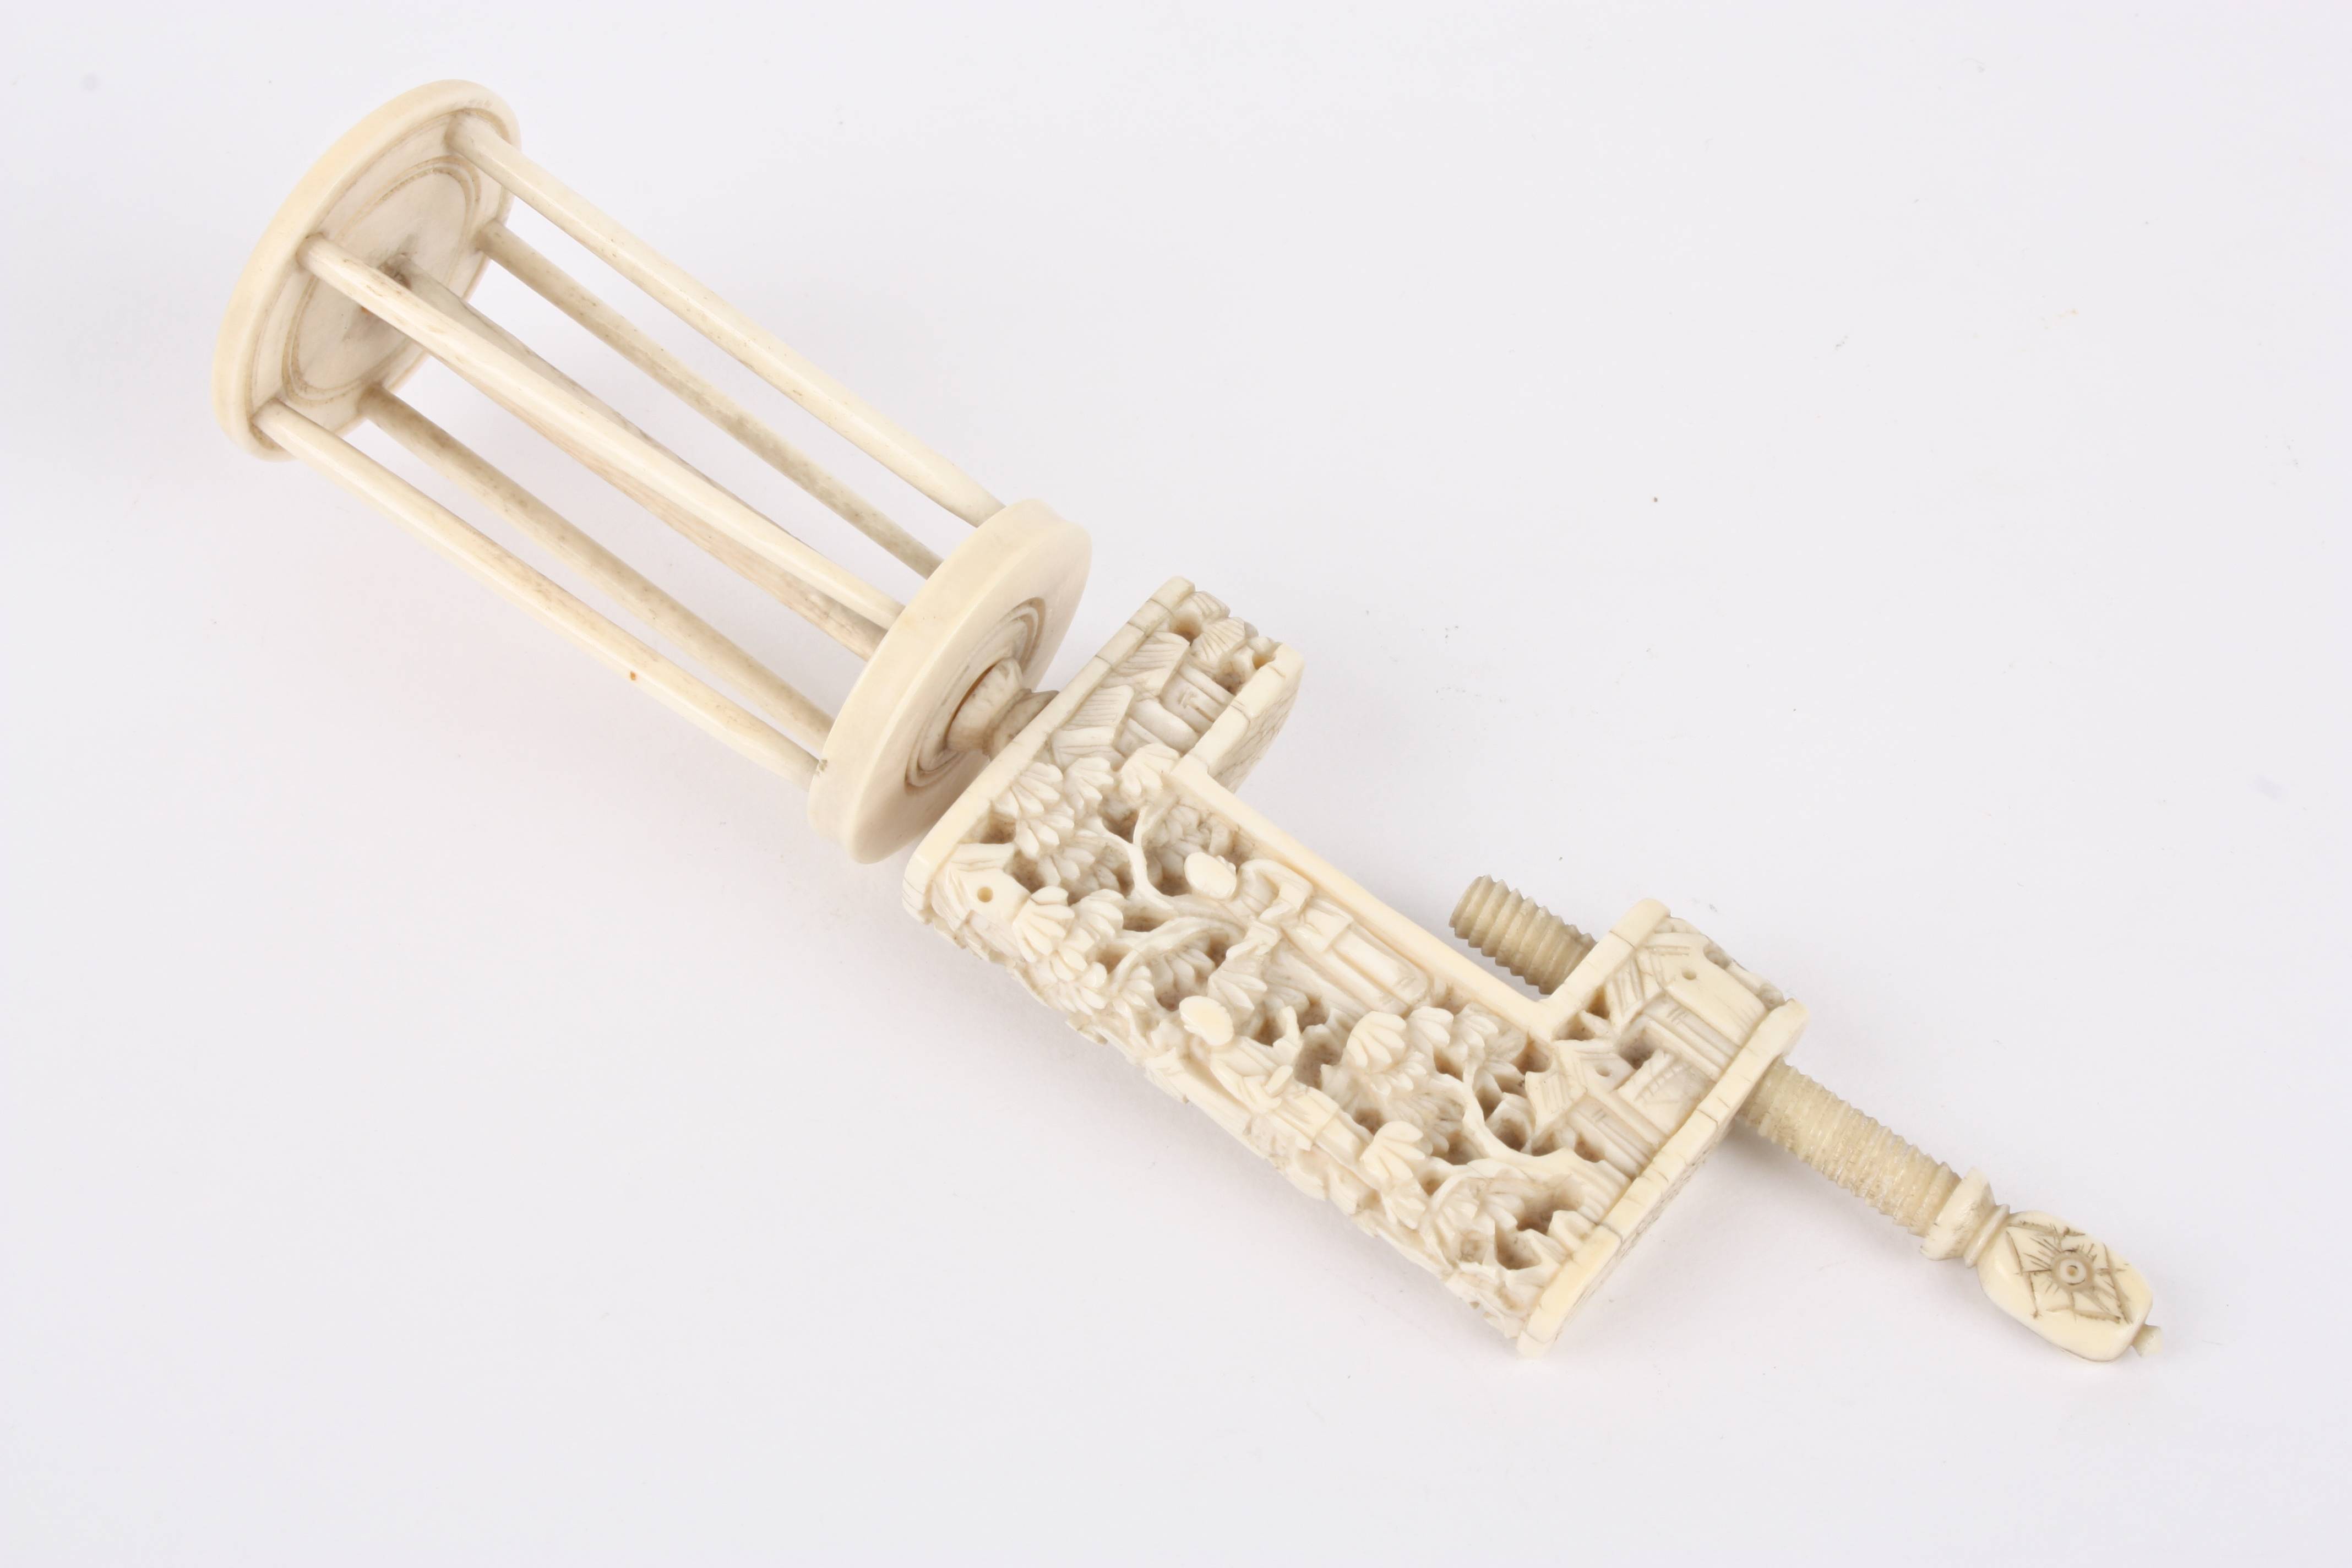 A late 19th century Chinese canton ivory bobbin clamp carved with figures, buildings and foliage.